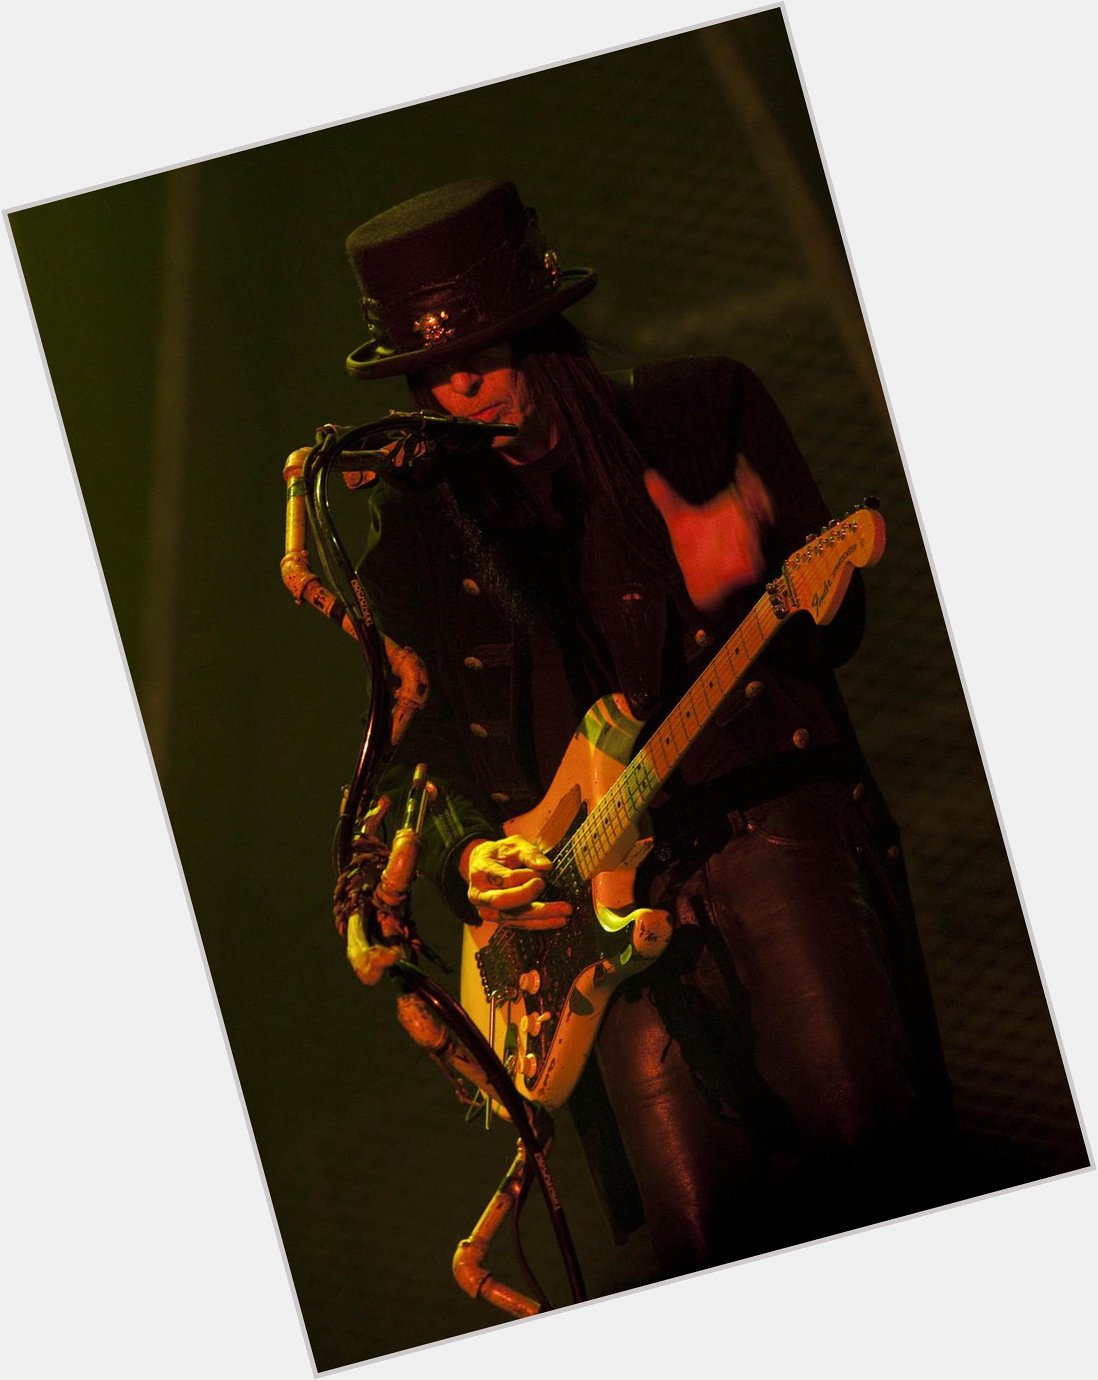 A very happy birthday to Mick Mars! Here he is rocking The Garden in March of 2009! 